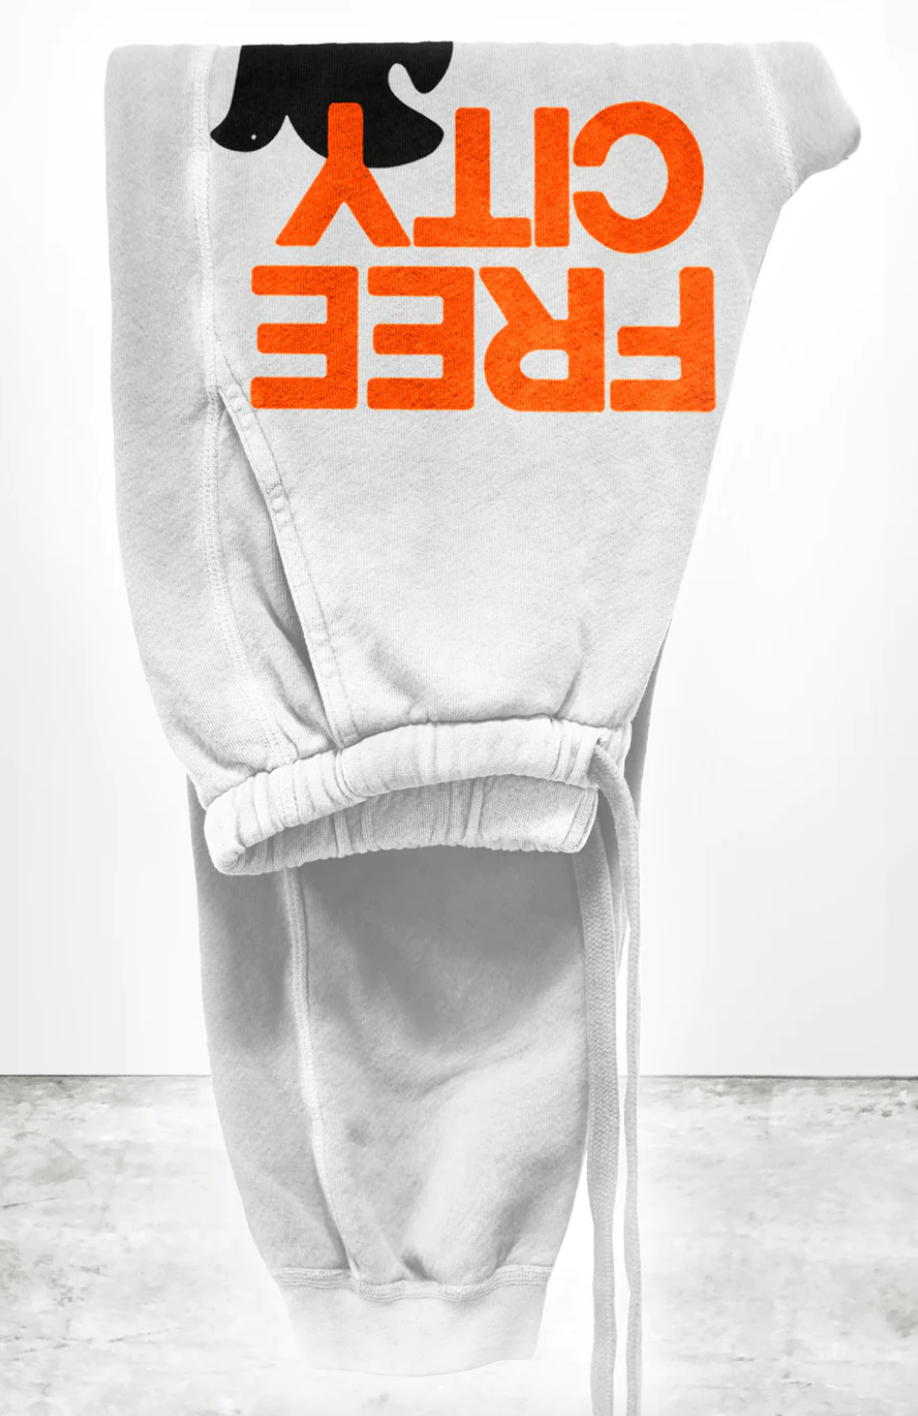 A white sweat pant with text in bold orange letters that reads "FREE CITY" displayed on a plain white background.